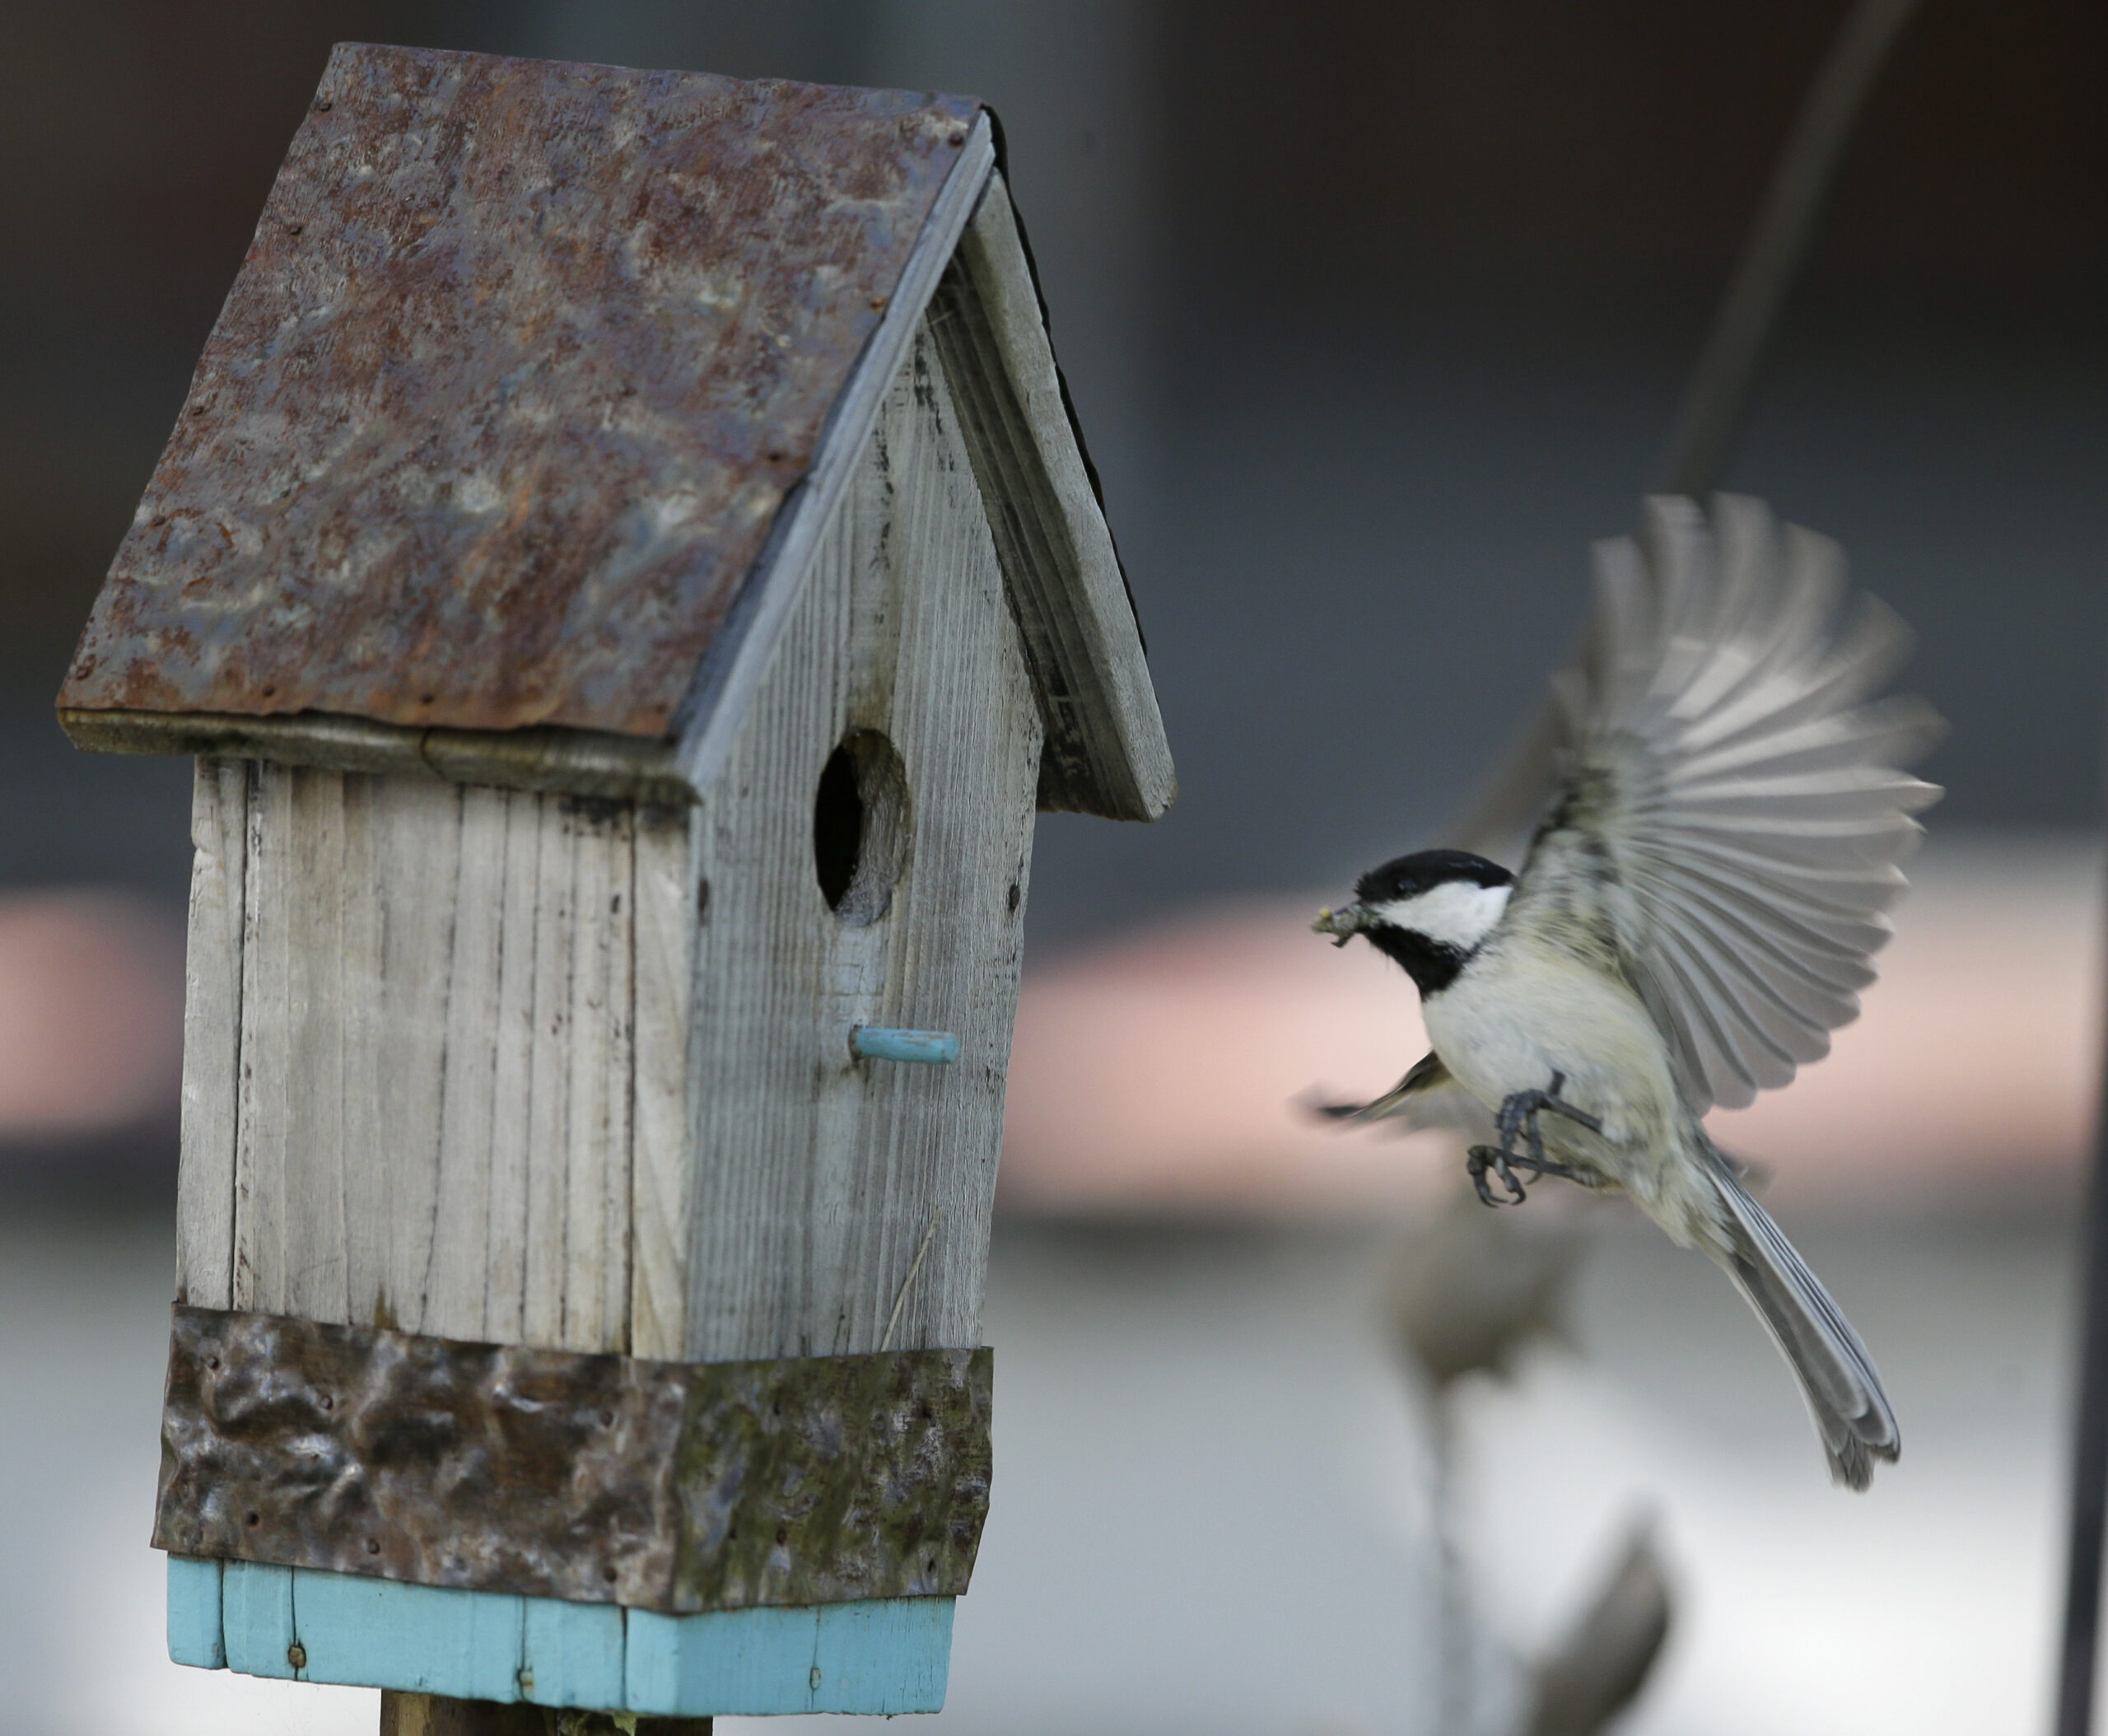 A Black-capped Chickadee brings home food